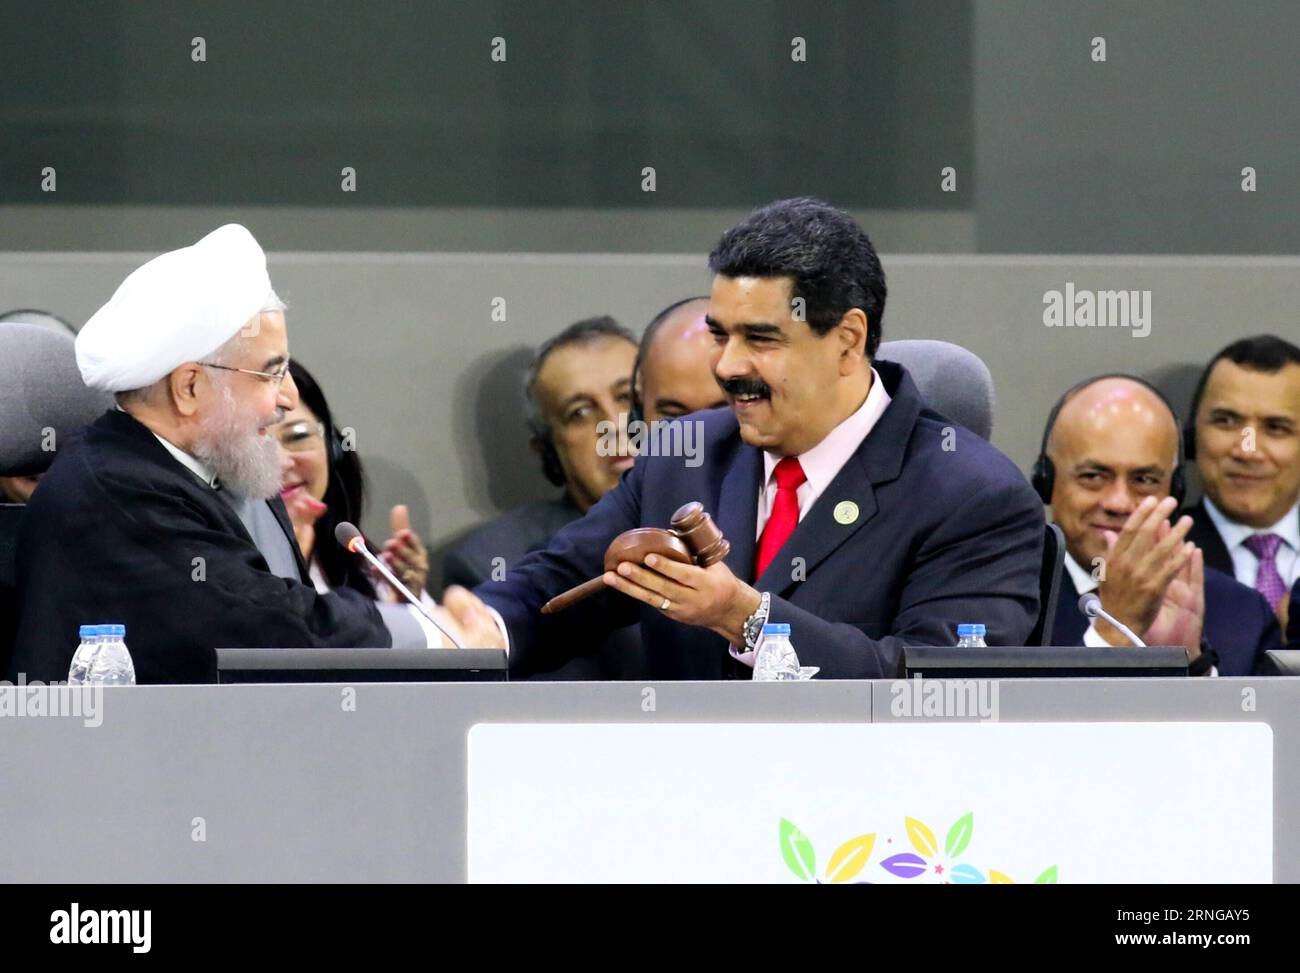 (160918) -- MARGARITA (VENEZUELA), Sept. 17, 2016 -- Venezuela s President Nicolas Maduro (R, front) shakes hands with Iranian President Hassan Rouhani at Hugo Chavez Frias Convention Center in Margarita Island, Venezuela, on Sept. 17, 2016. Iran officially handed over the three-year rotating presidency of the Non-Aligned Movement (NAM) to Venezuela at the 17th NAM Summit held Saturday in Venezuela s Margarita Island. Presidential Press/AVN) (jp) (fnc)(yy) VENEZUELA-MARGARITA-NAM-SUMMIT e AVN PUBLICATIONxNOTxINxCHN   Margarita Venezuela Sept 17 2016 Venezuela S President Nicolas Maduro r Front Stock Photo